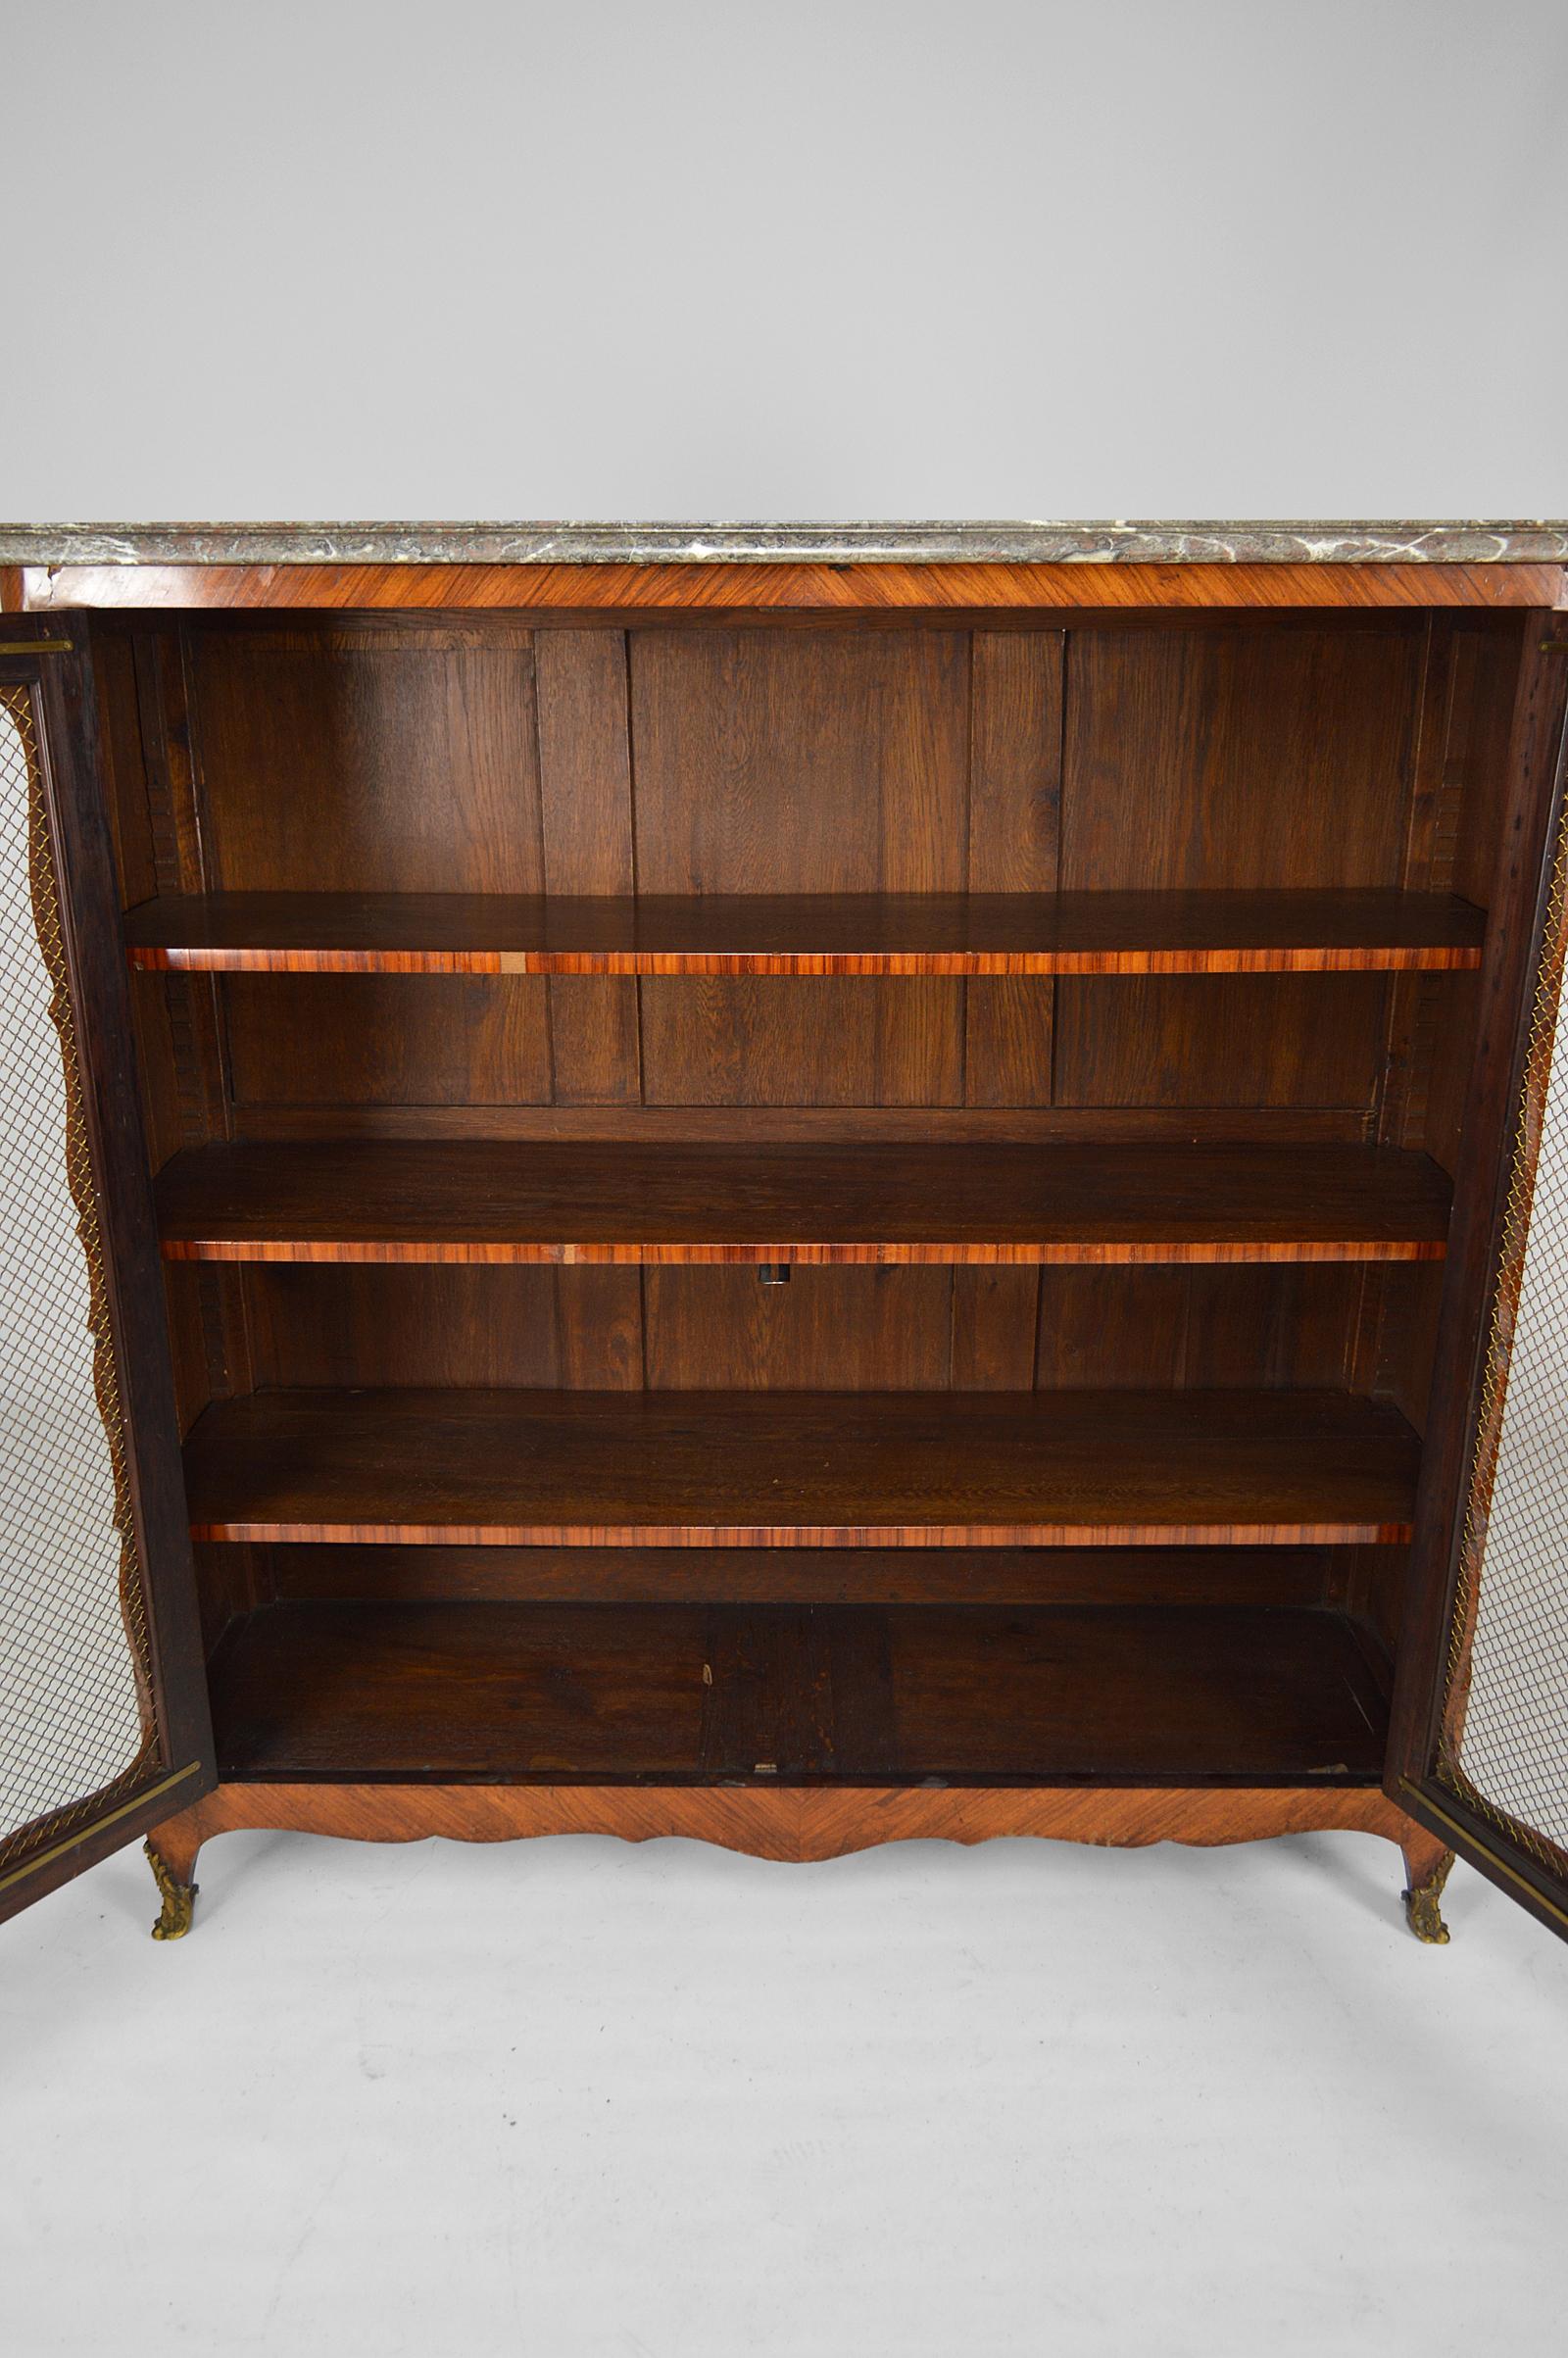 Louis XV Bookcase by Pierre Garnier with Inlay Wood and Marble Top, circa 1750 For Sale 9